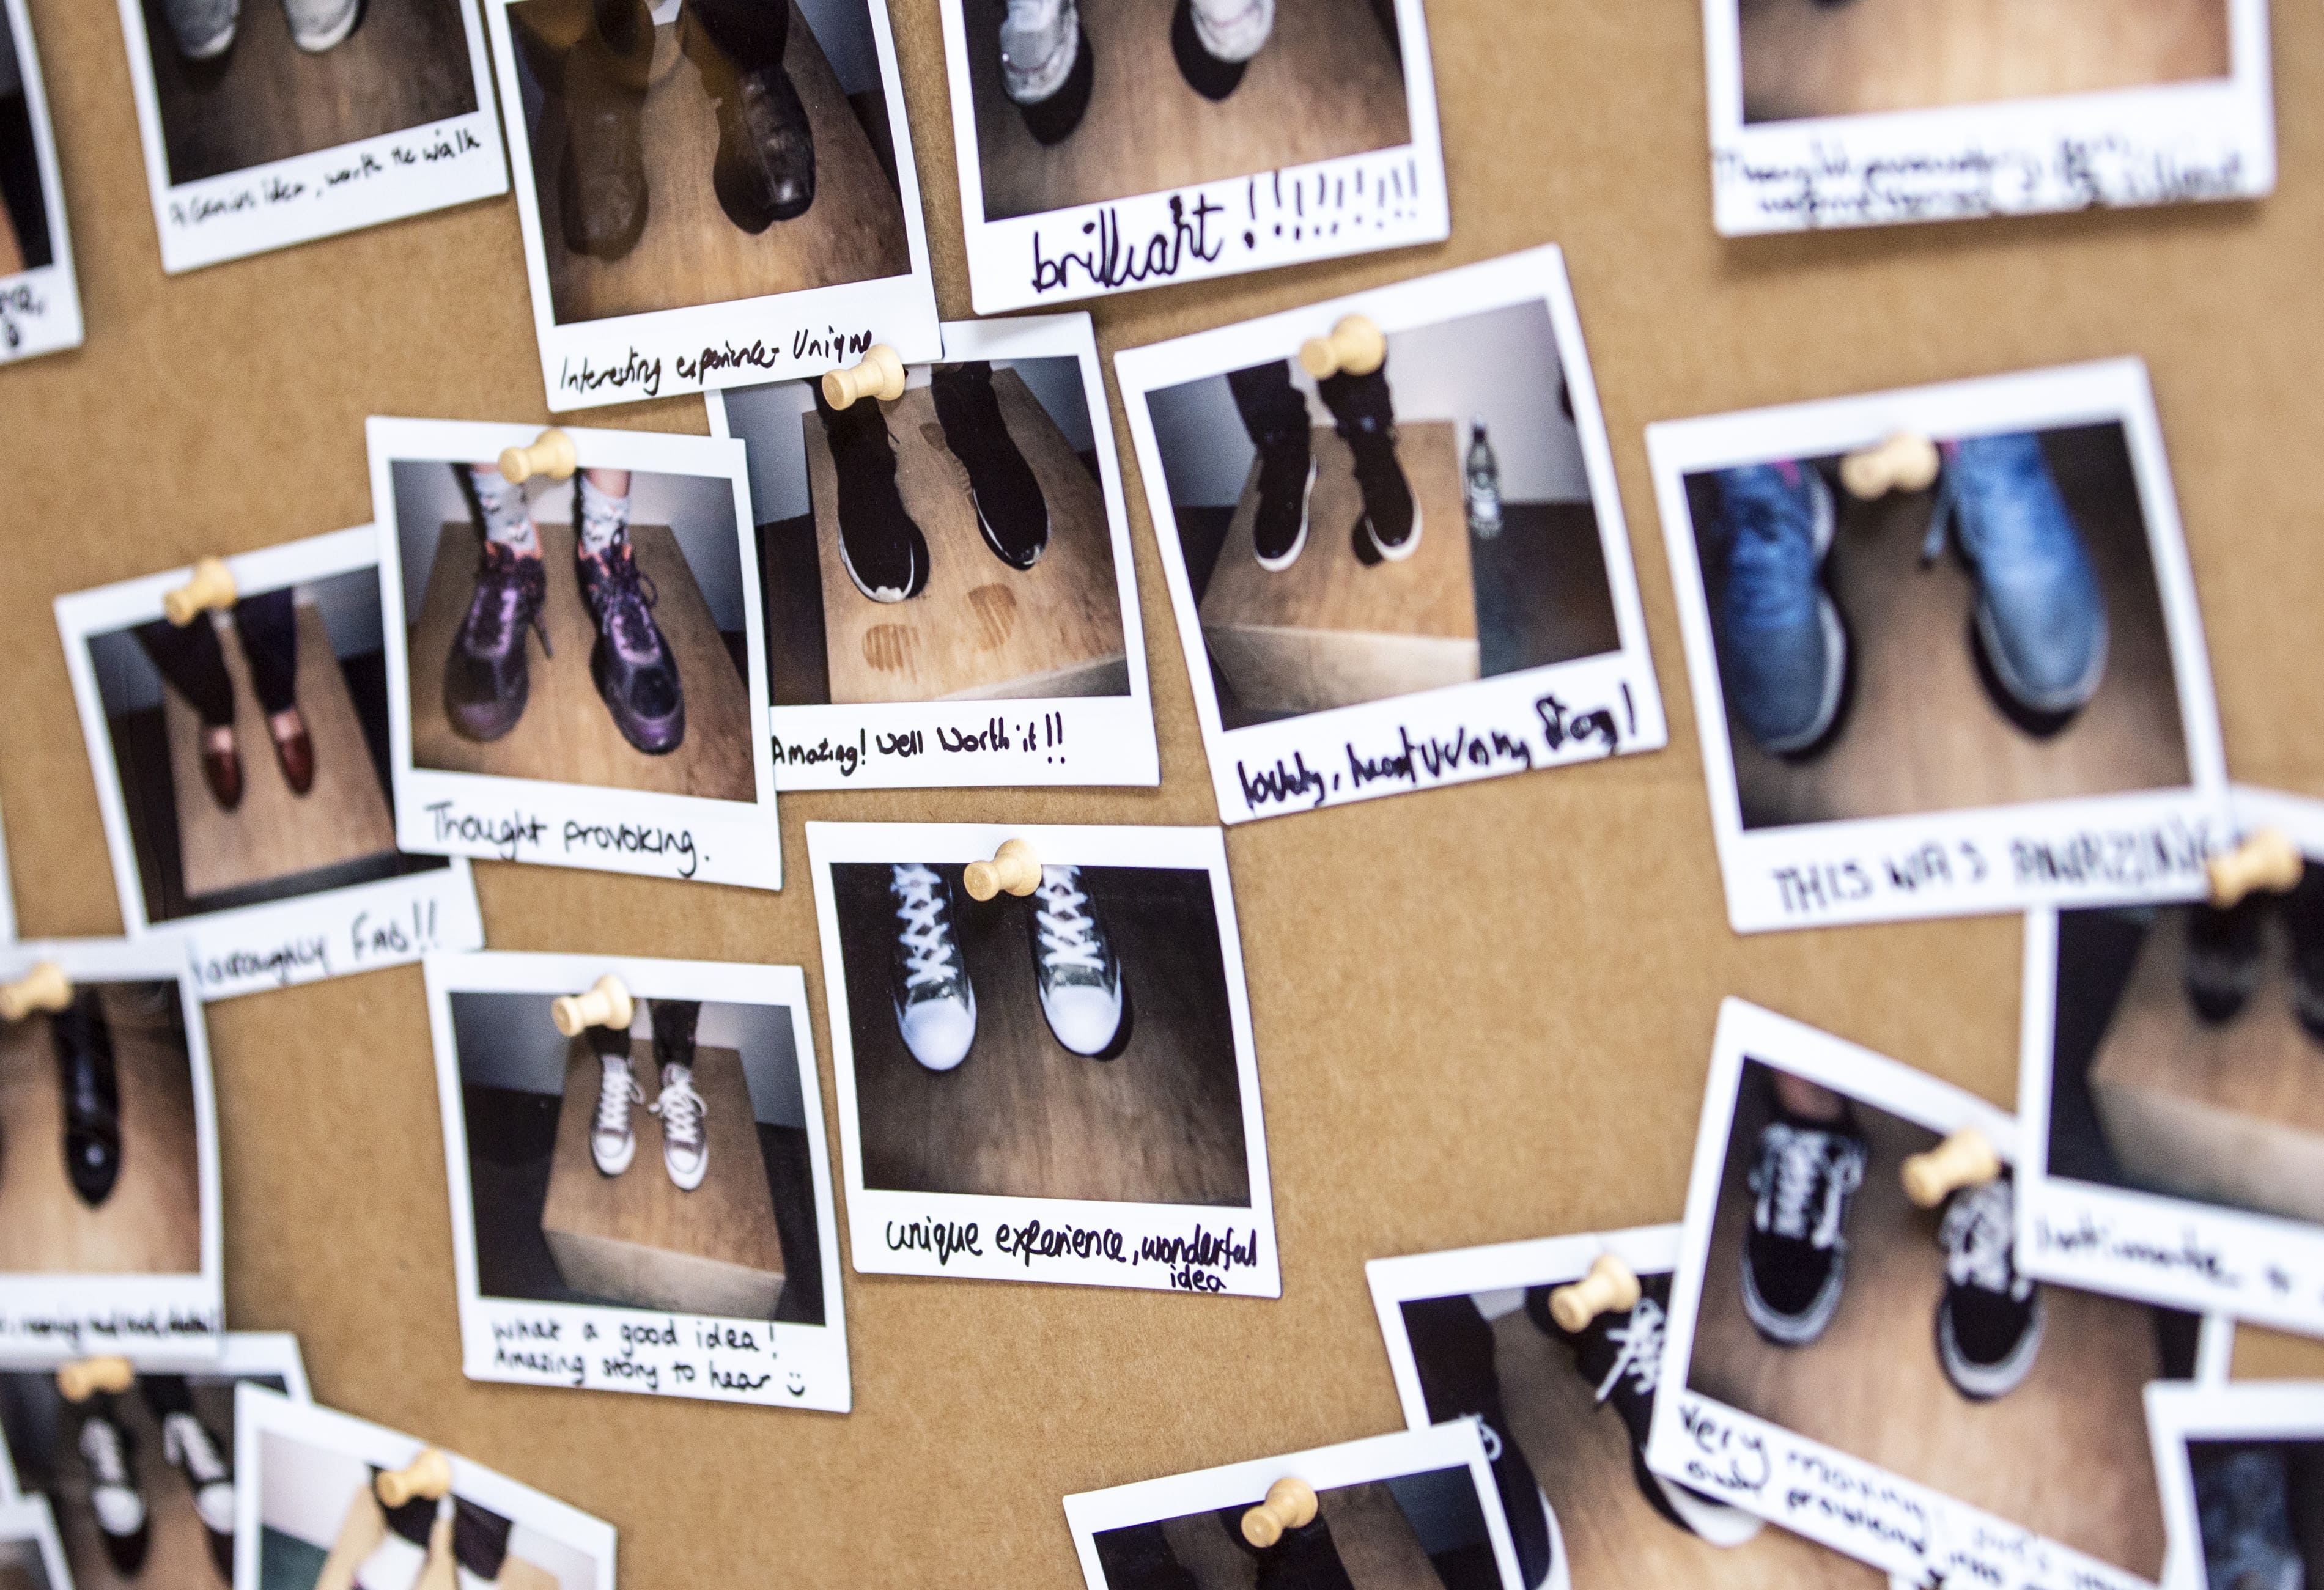 Polaroid pictures showing feet wearing a variety of shoes, displayed on a bulletin board.